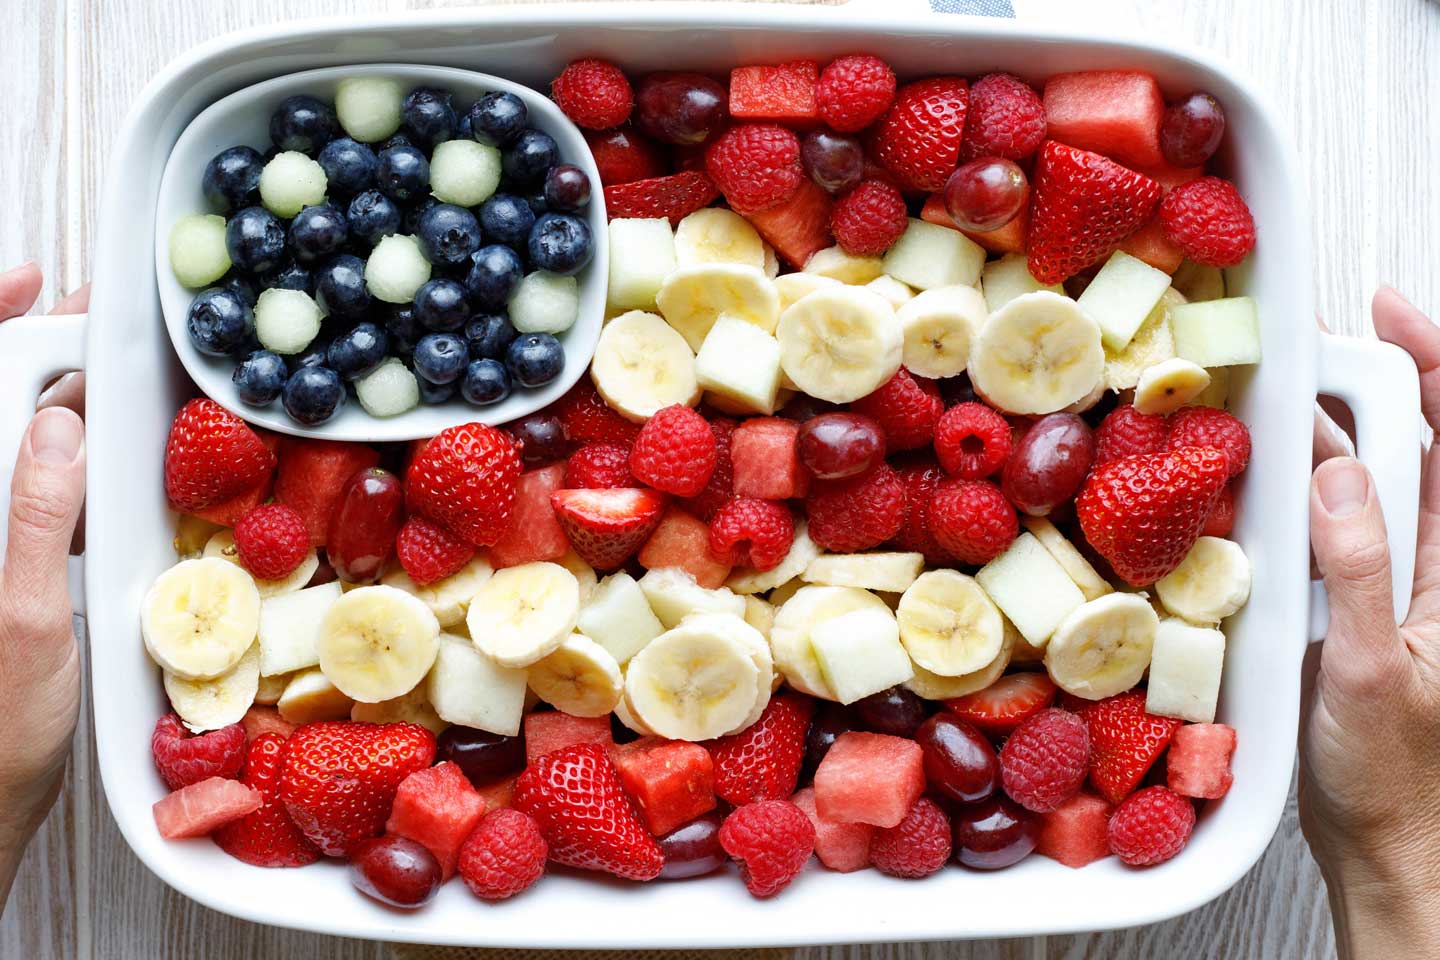 Flag fruit salad in a rectangle pan - rows of red and white fruit with a blue area dotted with white melon balls to make stars